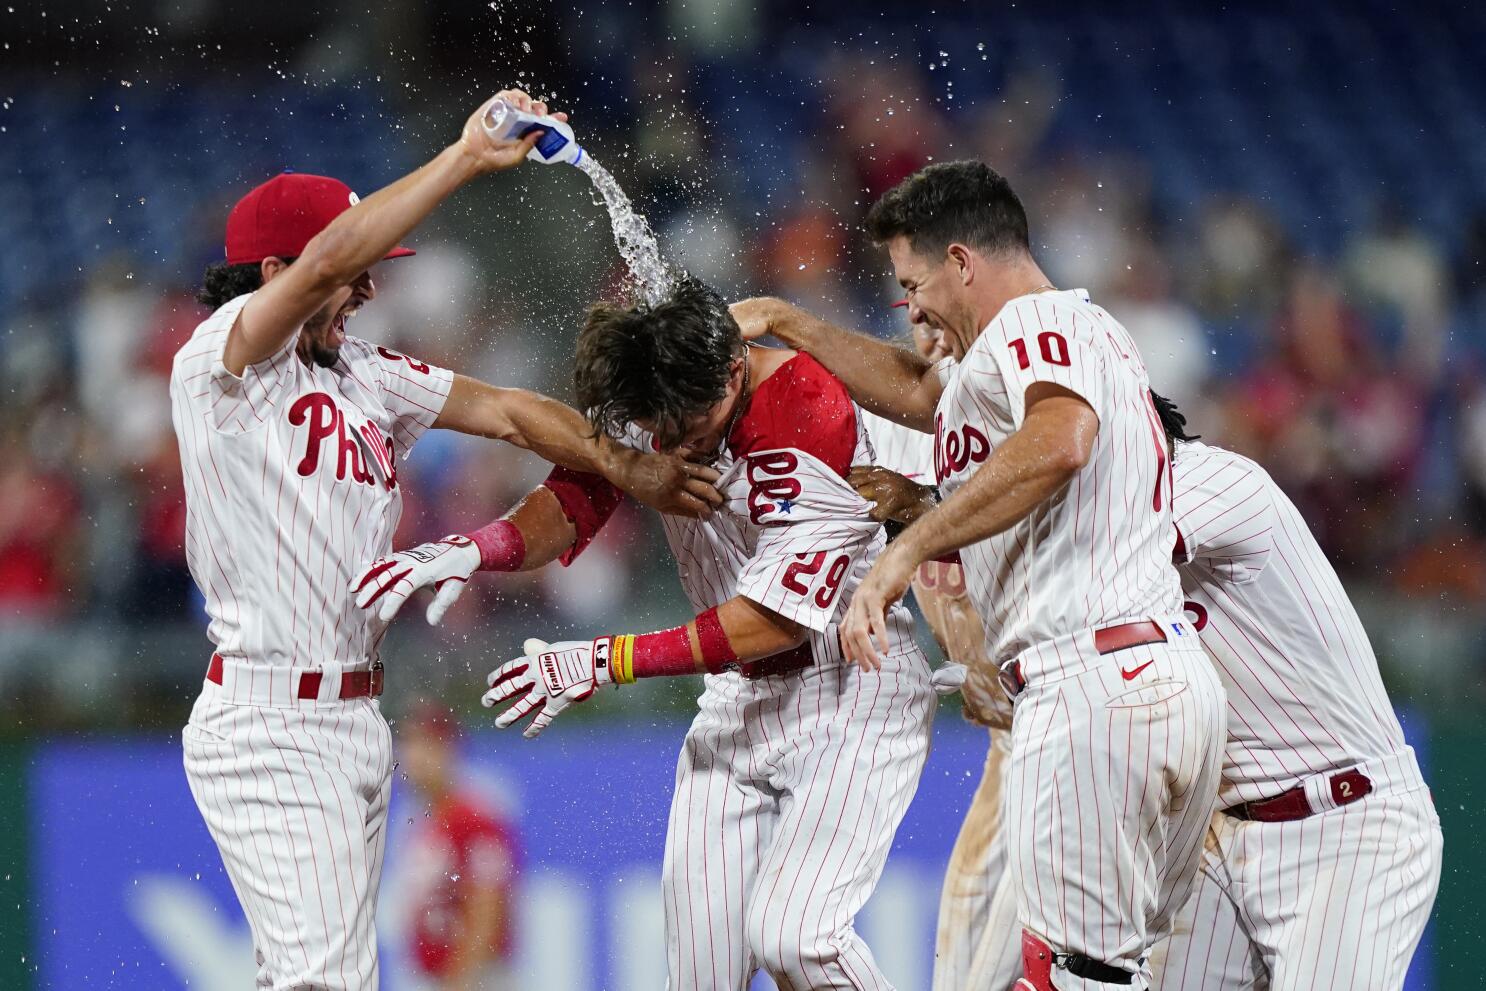 Maton's walk-off single gives Phillies 7-6 win over Reds - The San Diego  Union-Tribune